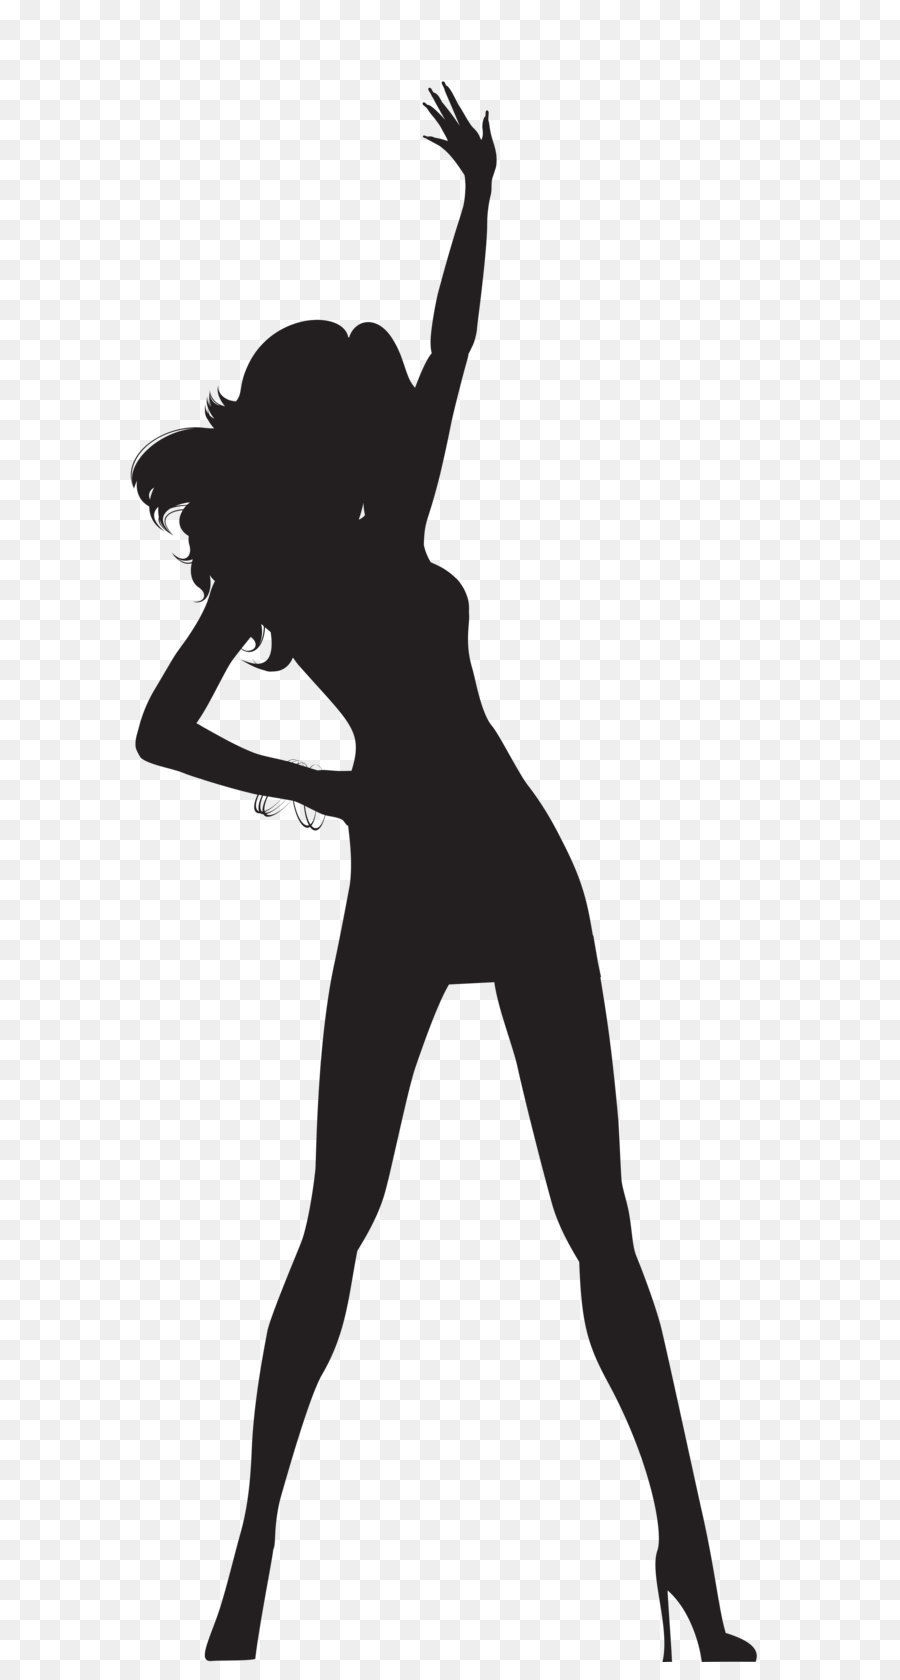 Clip art Silhouette Woman Vector graphics Portable Network Graphics - dance graphic png girl silhouette png download - 1434*2773 - Free Transparent Silhouette png Download.